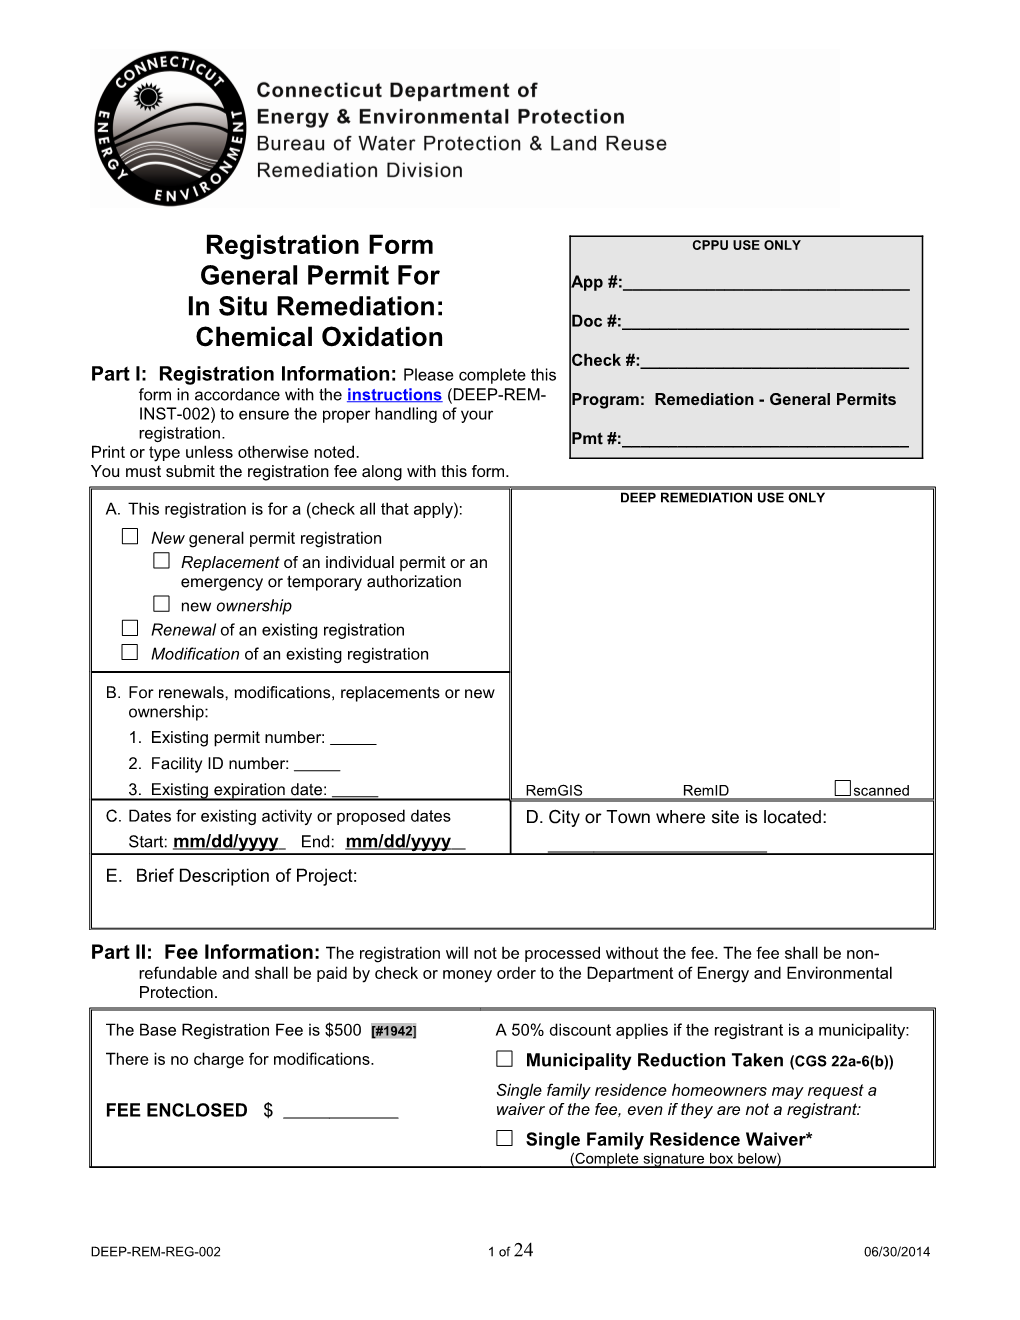 General Permit Registration Form for in Situ Remediation: Chemical Oxidation